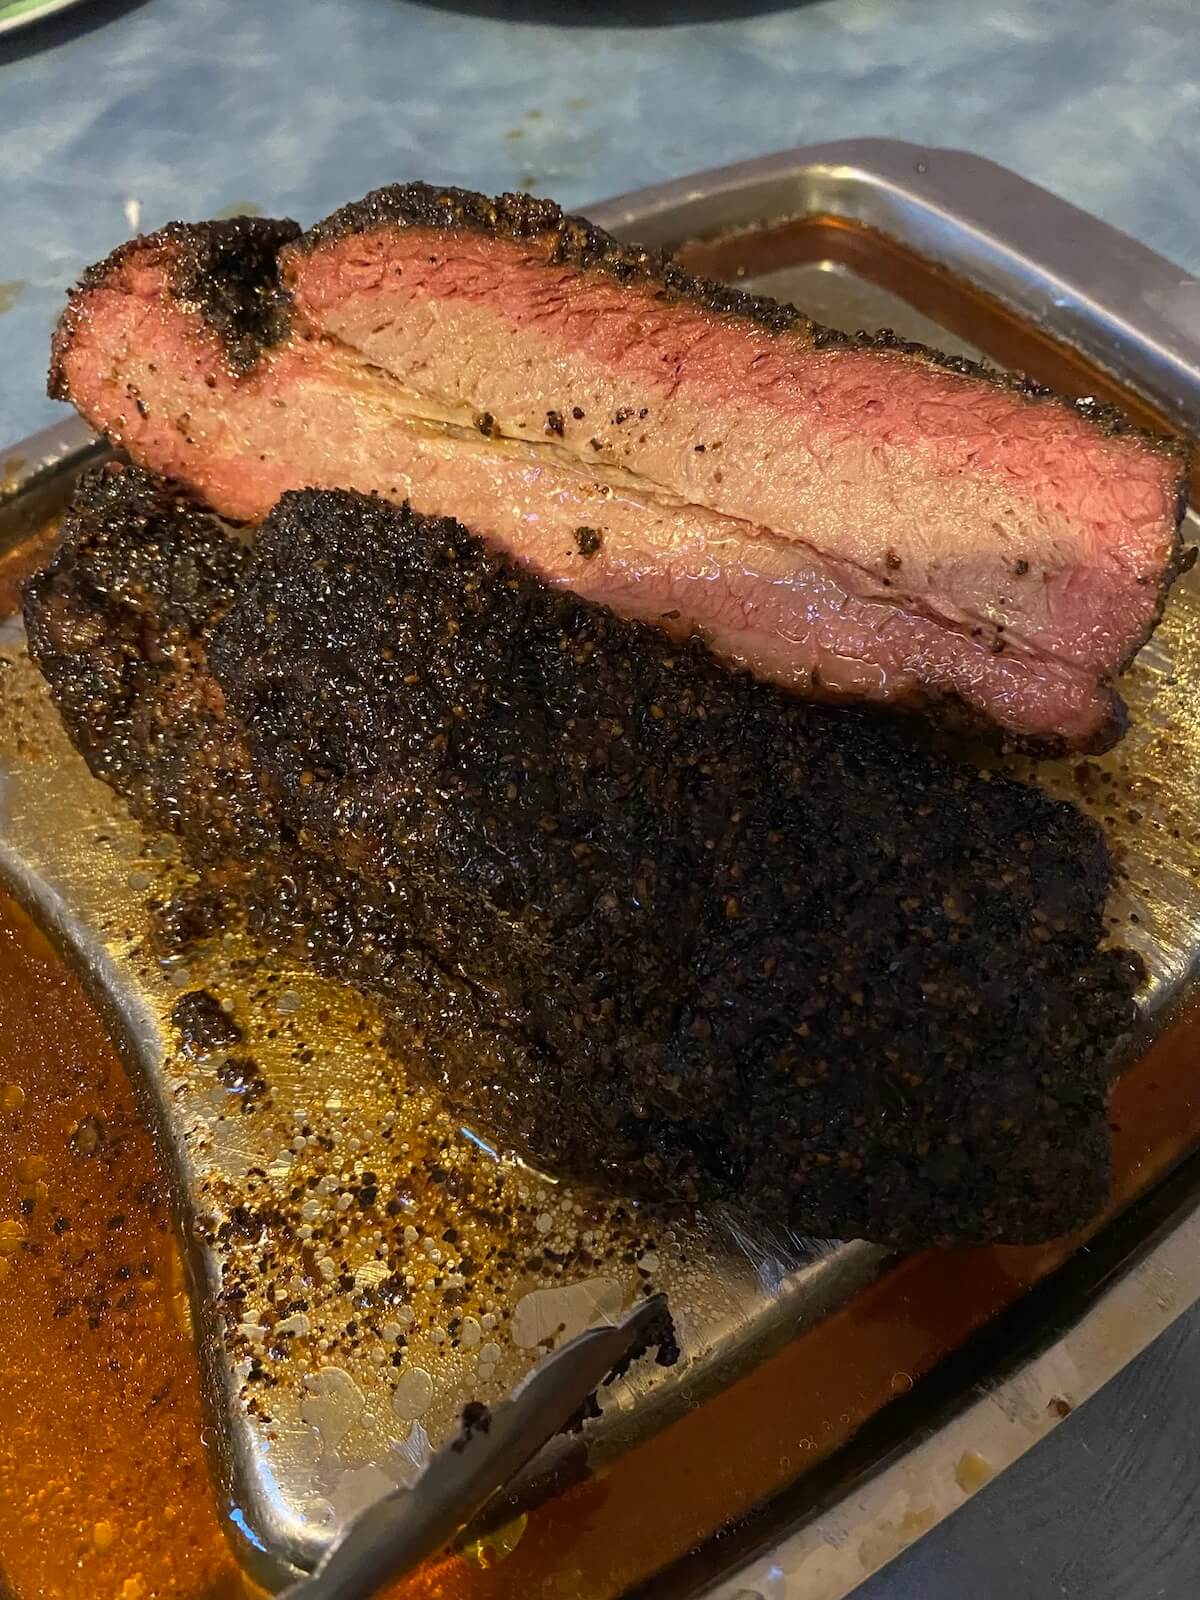 Smoke ring around edges of smoked brisket, carved into slices on silver tray.